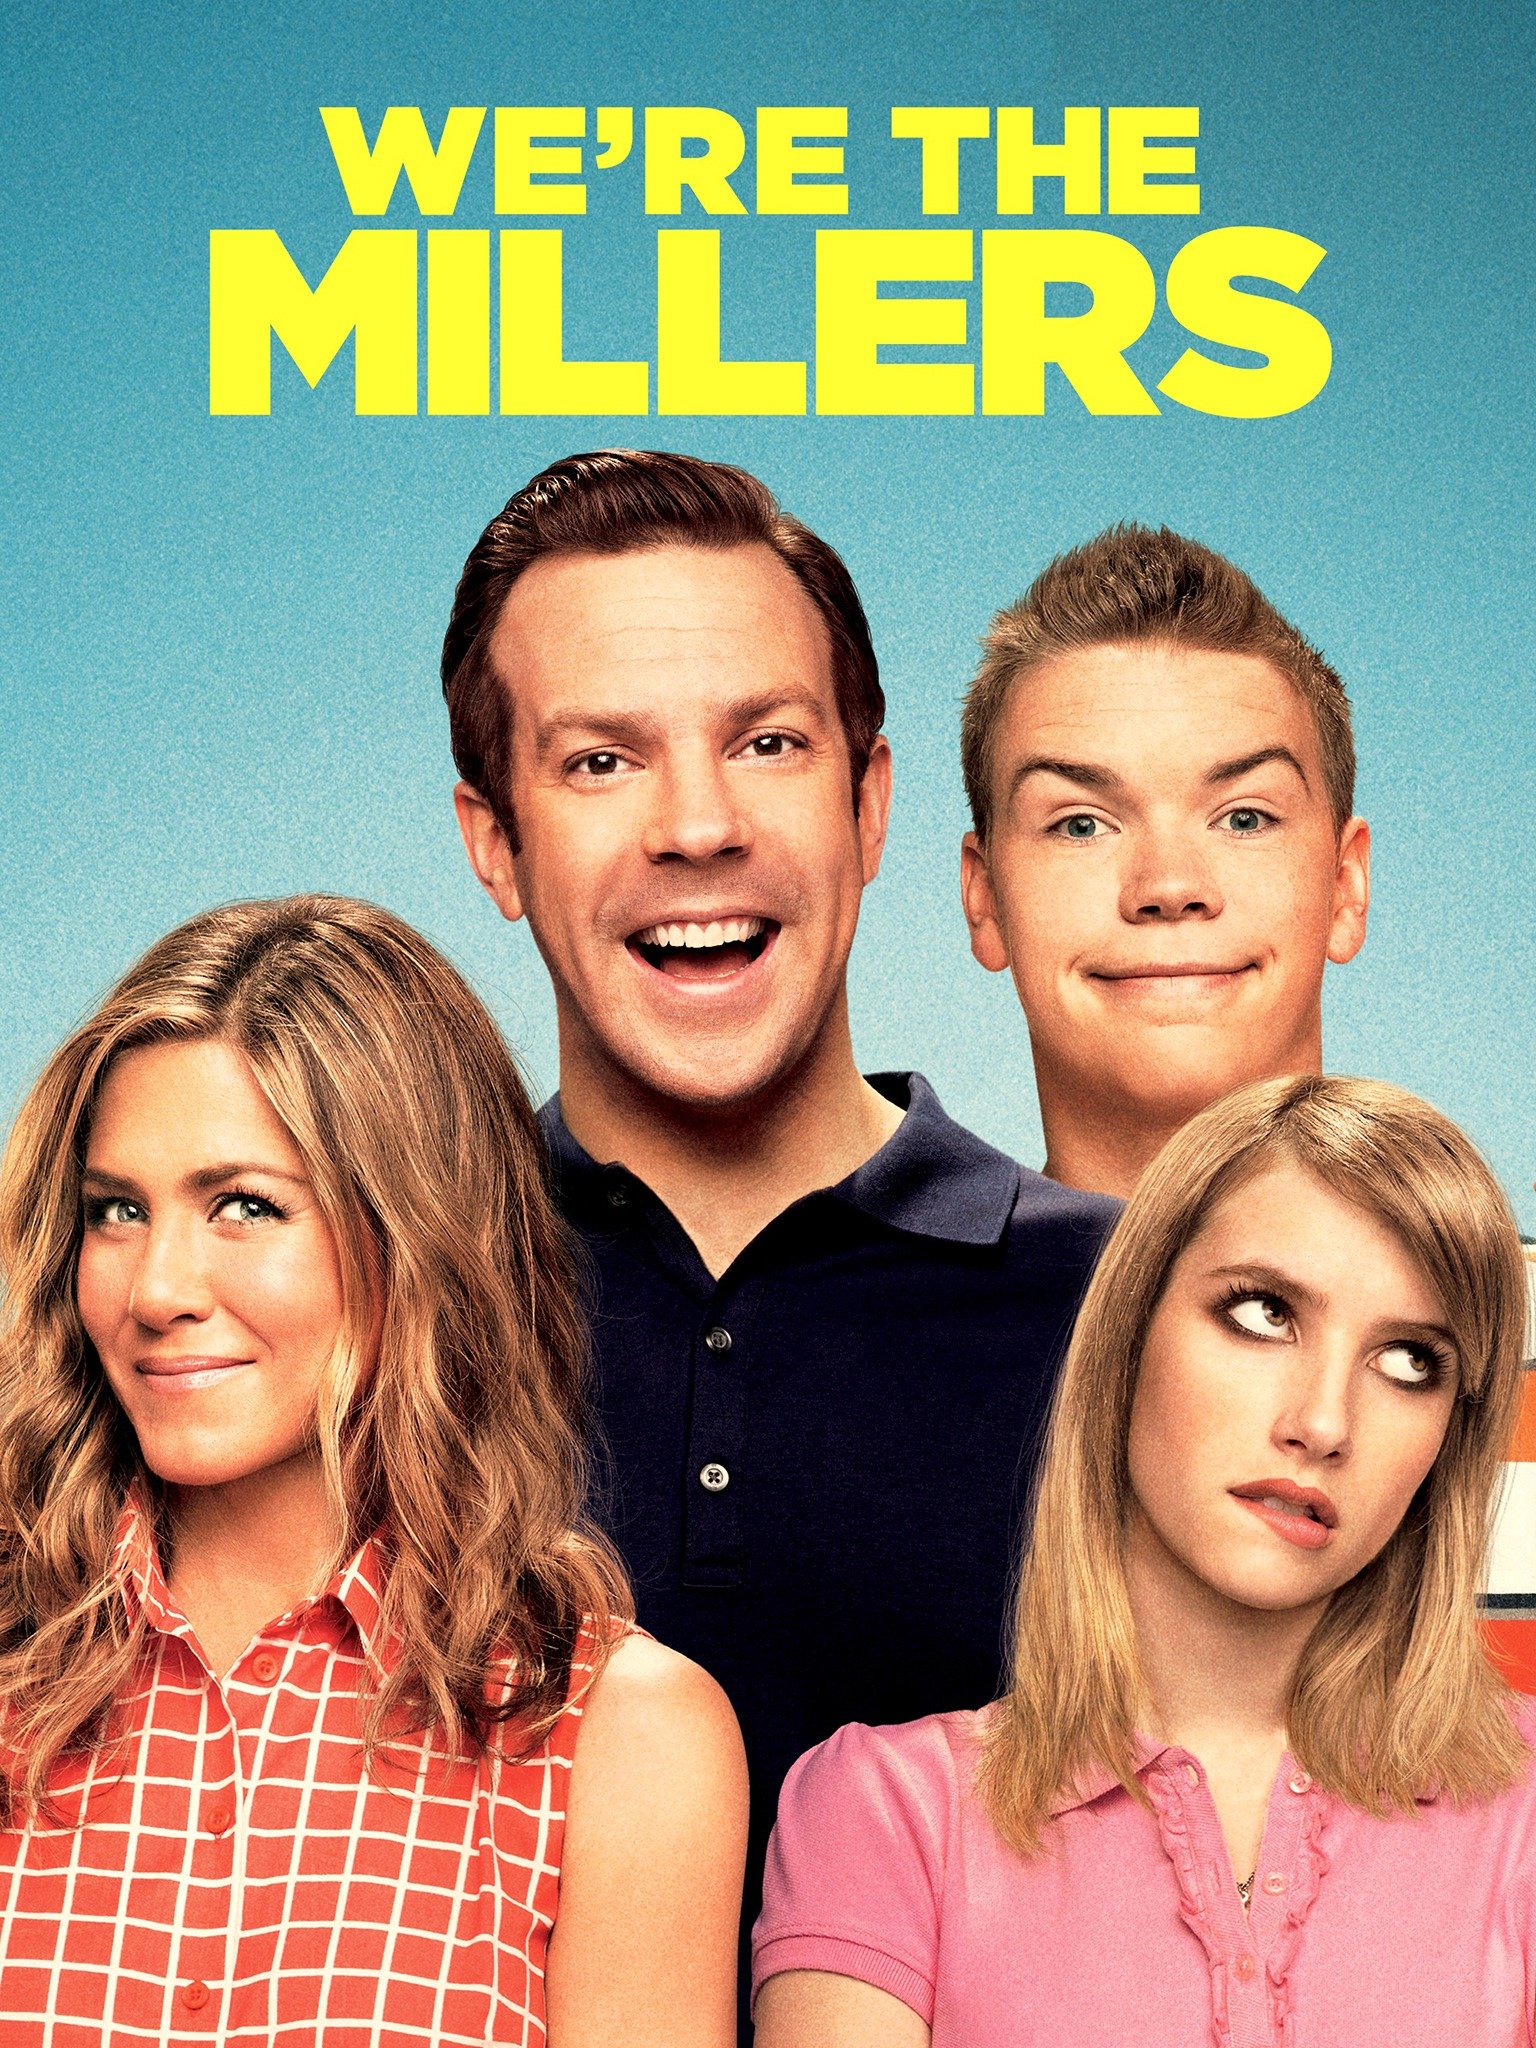 We're The Millers' And The Audience May Laugh (Movie Review)